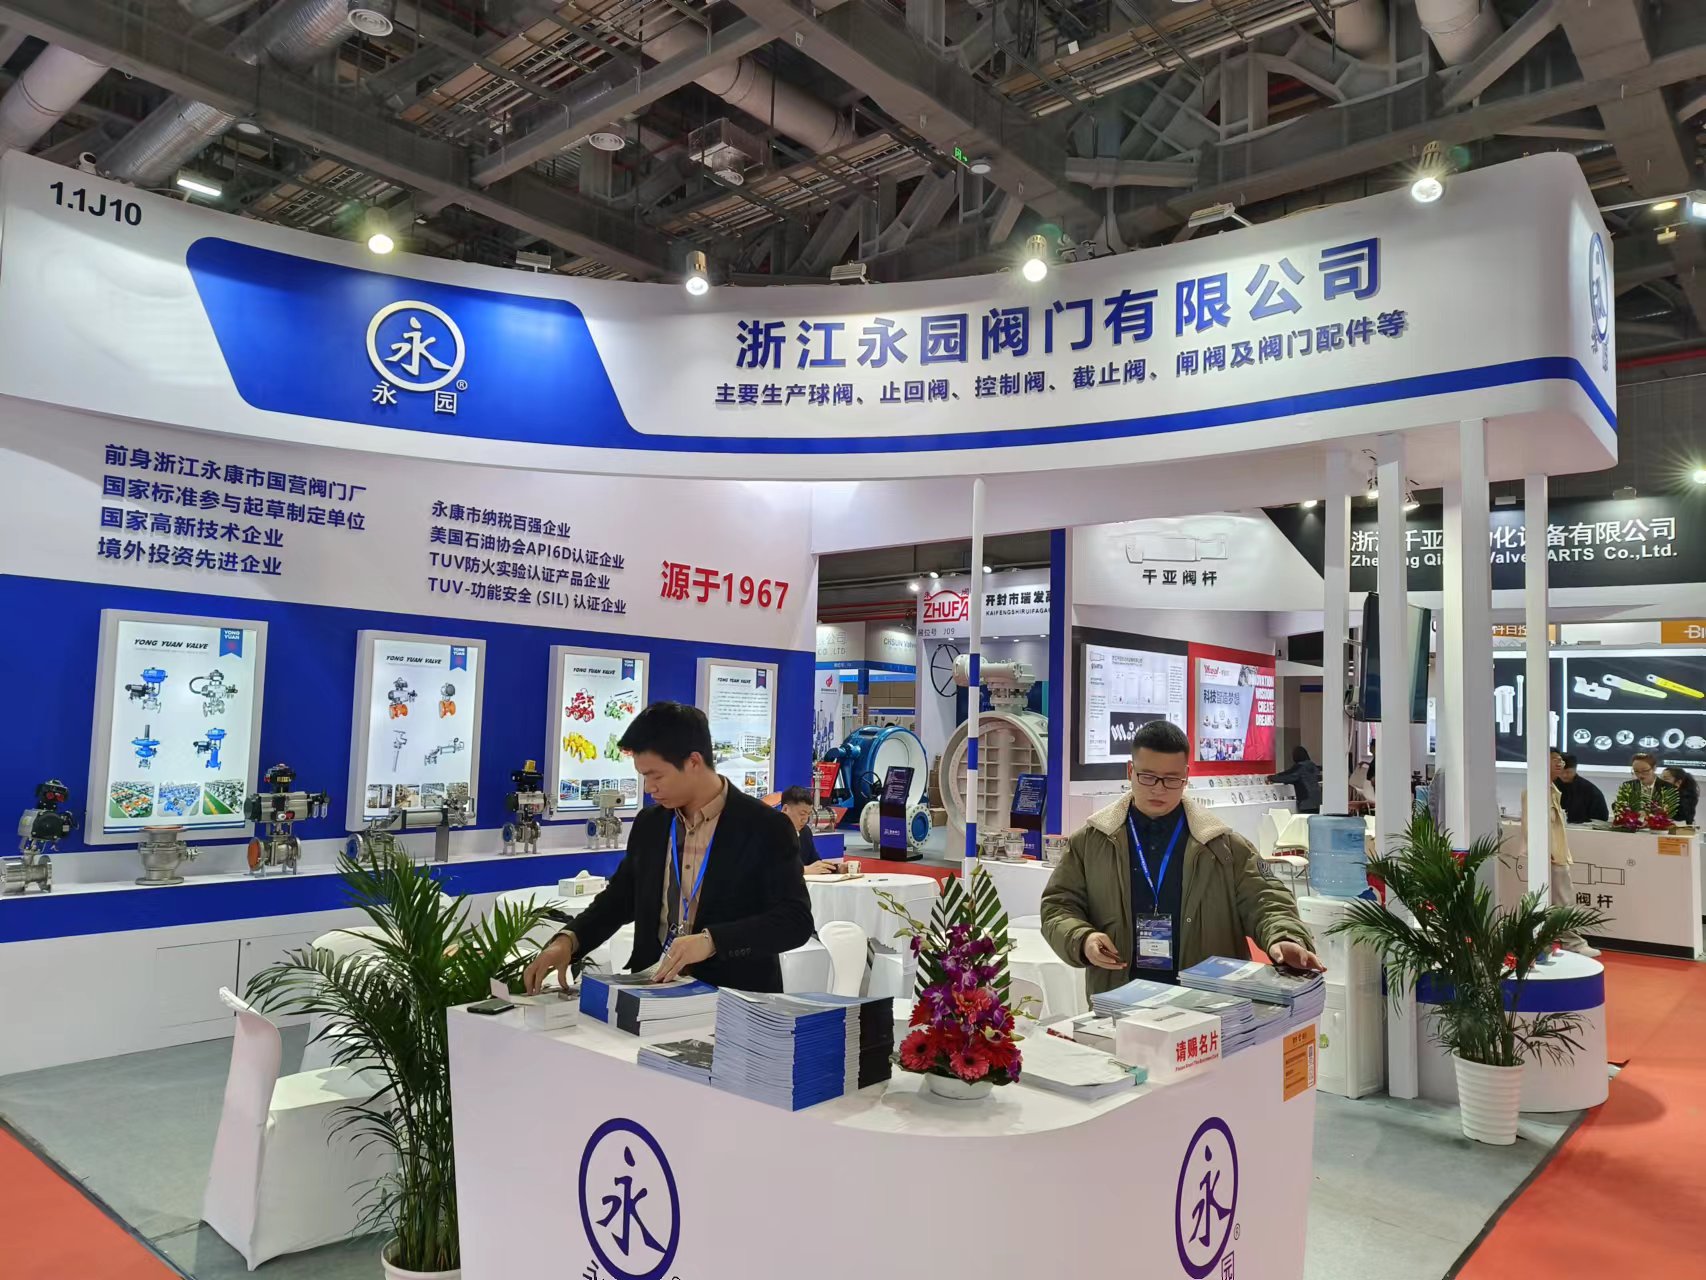 Participated in the 11th China International Fluid Machinery Exhibition at NECC (Shanghai)(图3)